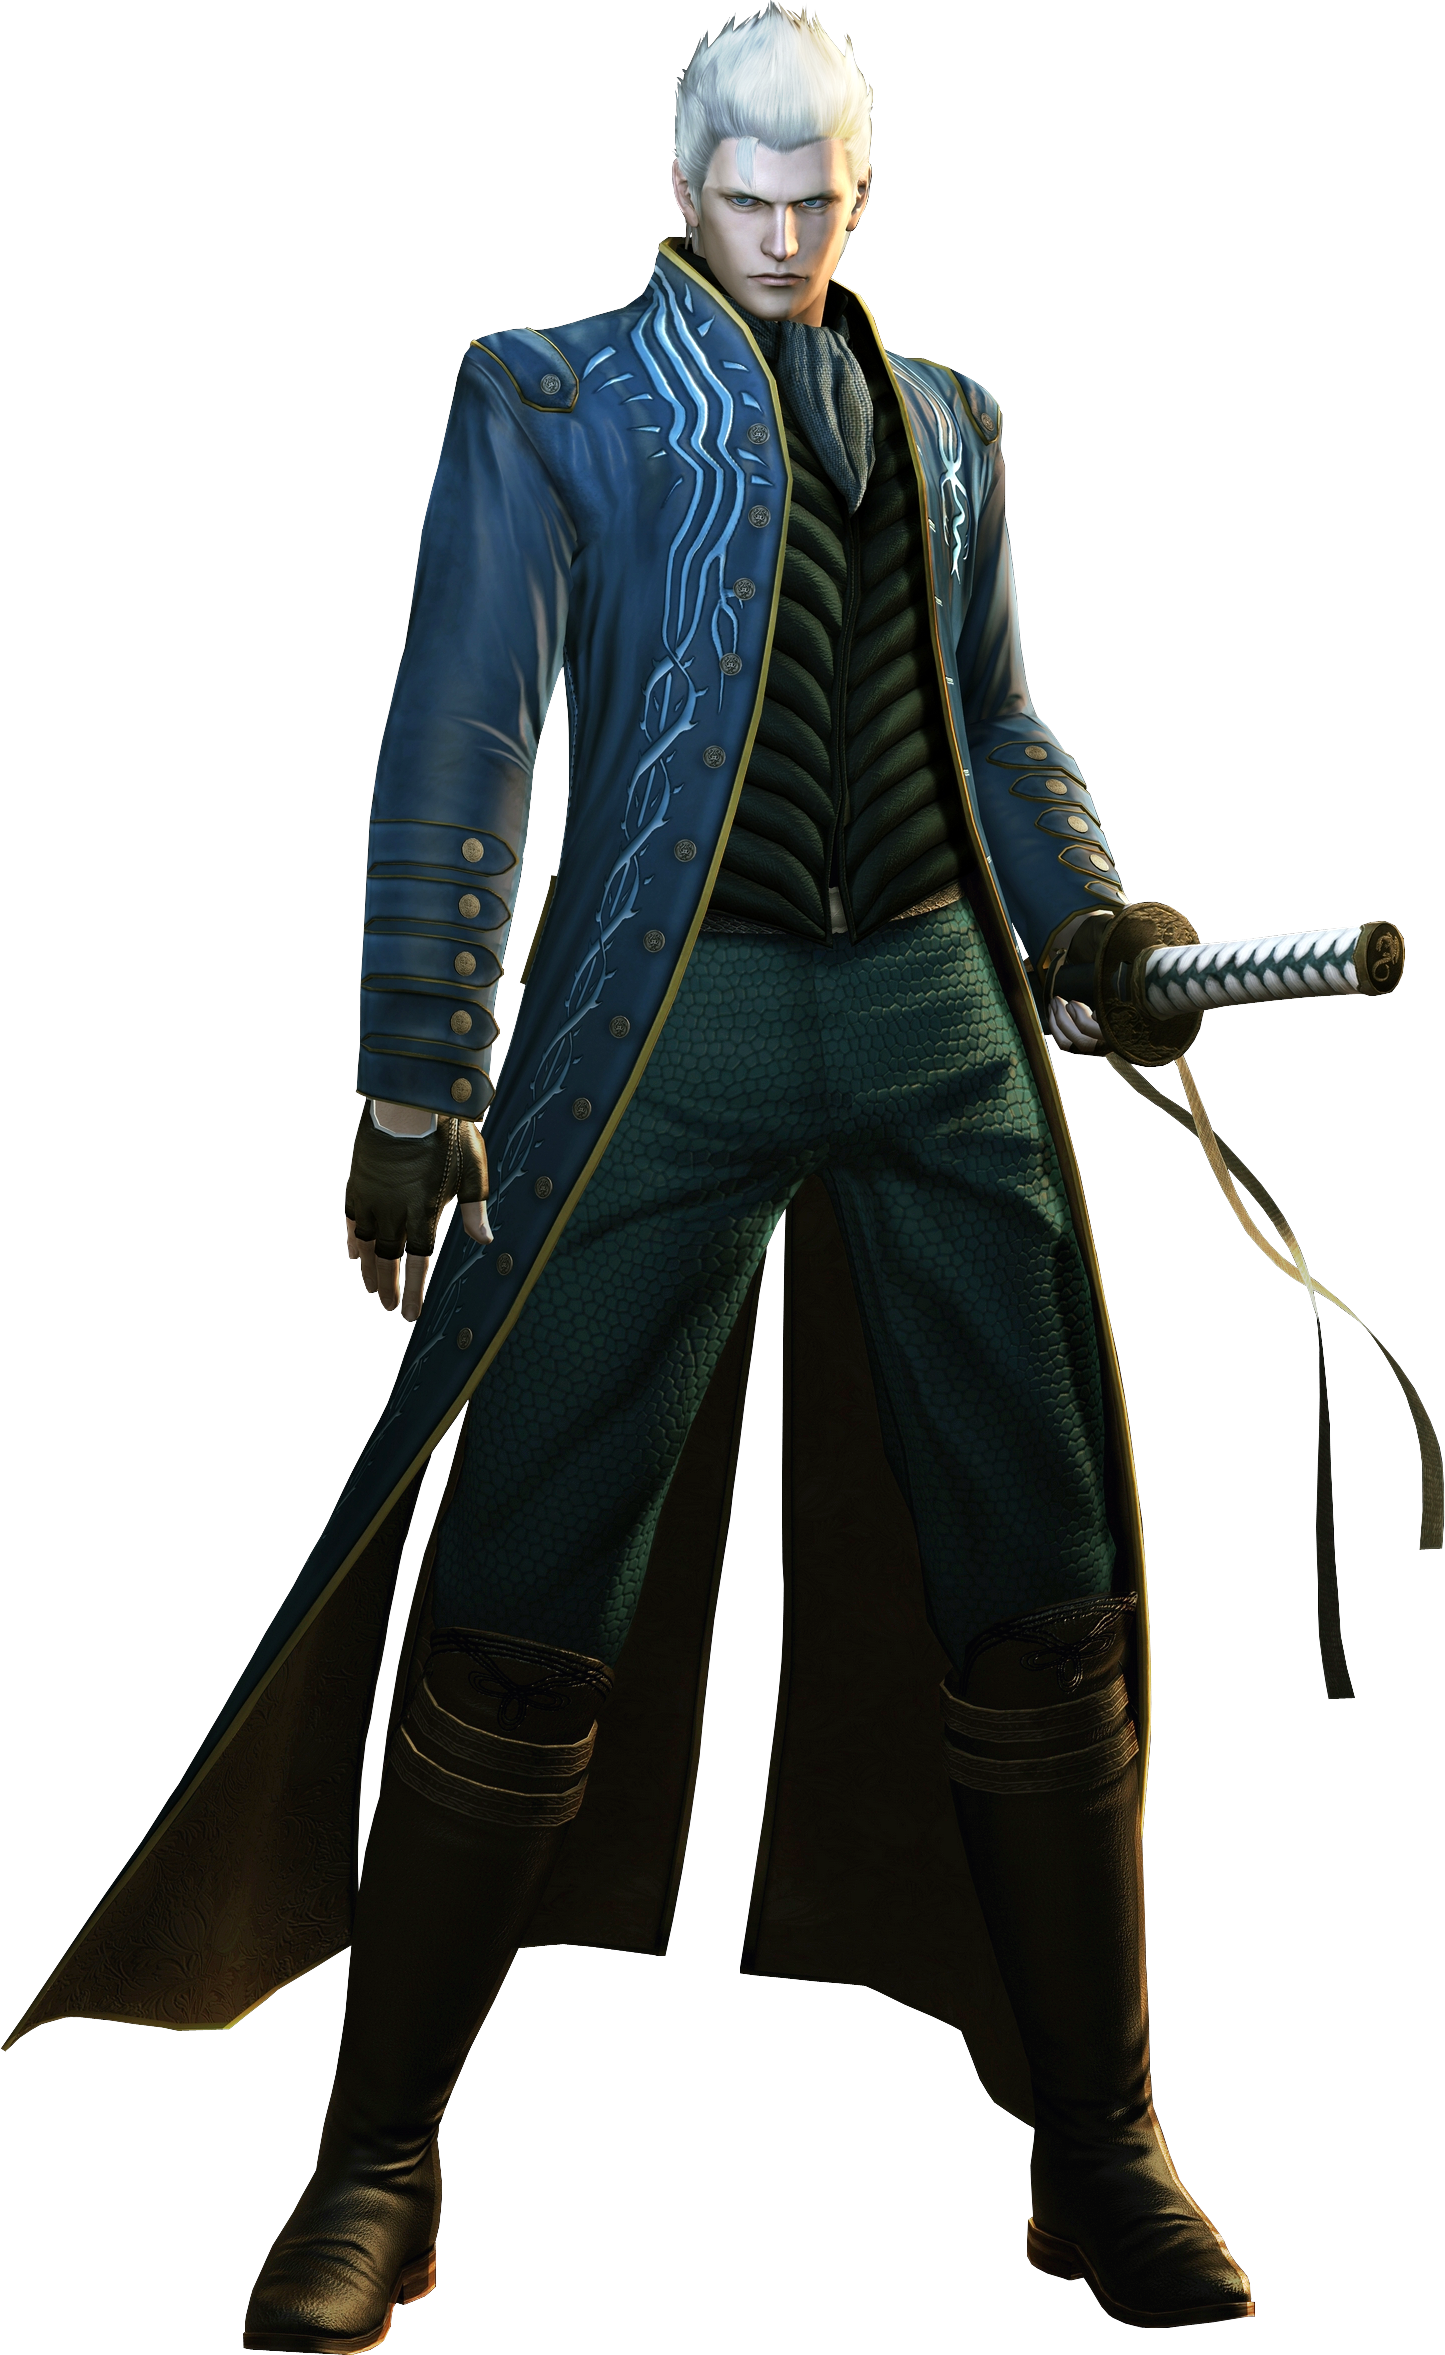 devil may cry 4 special edition wiki